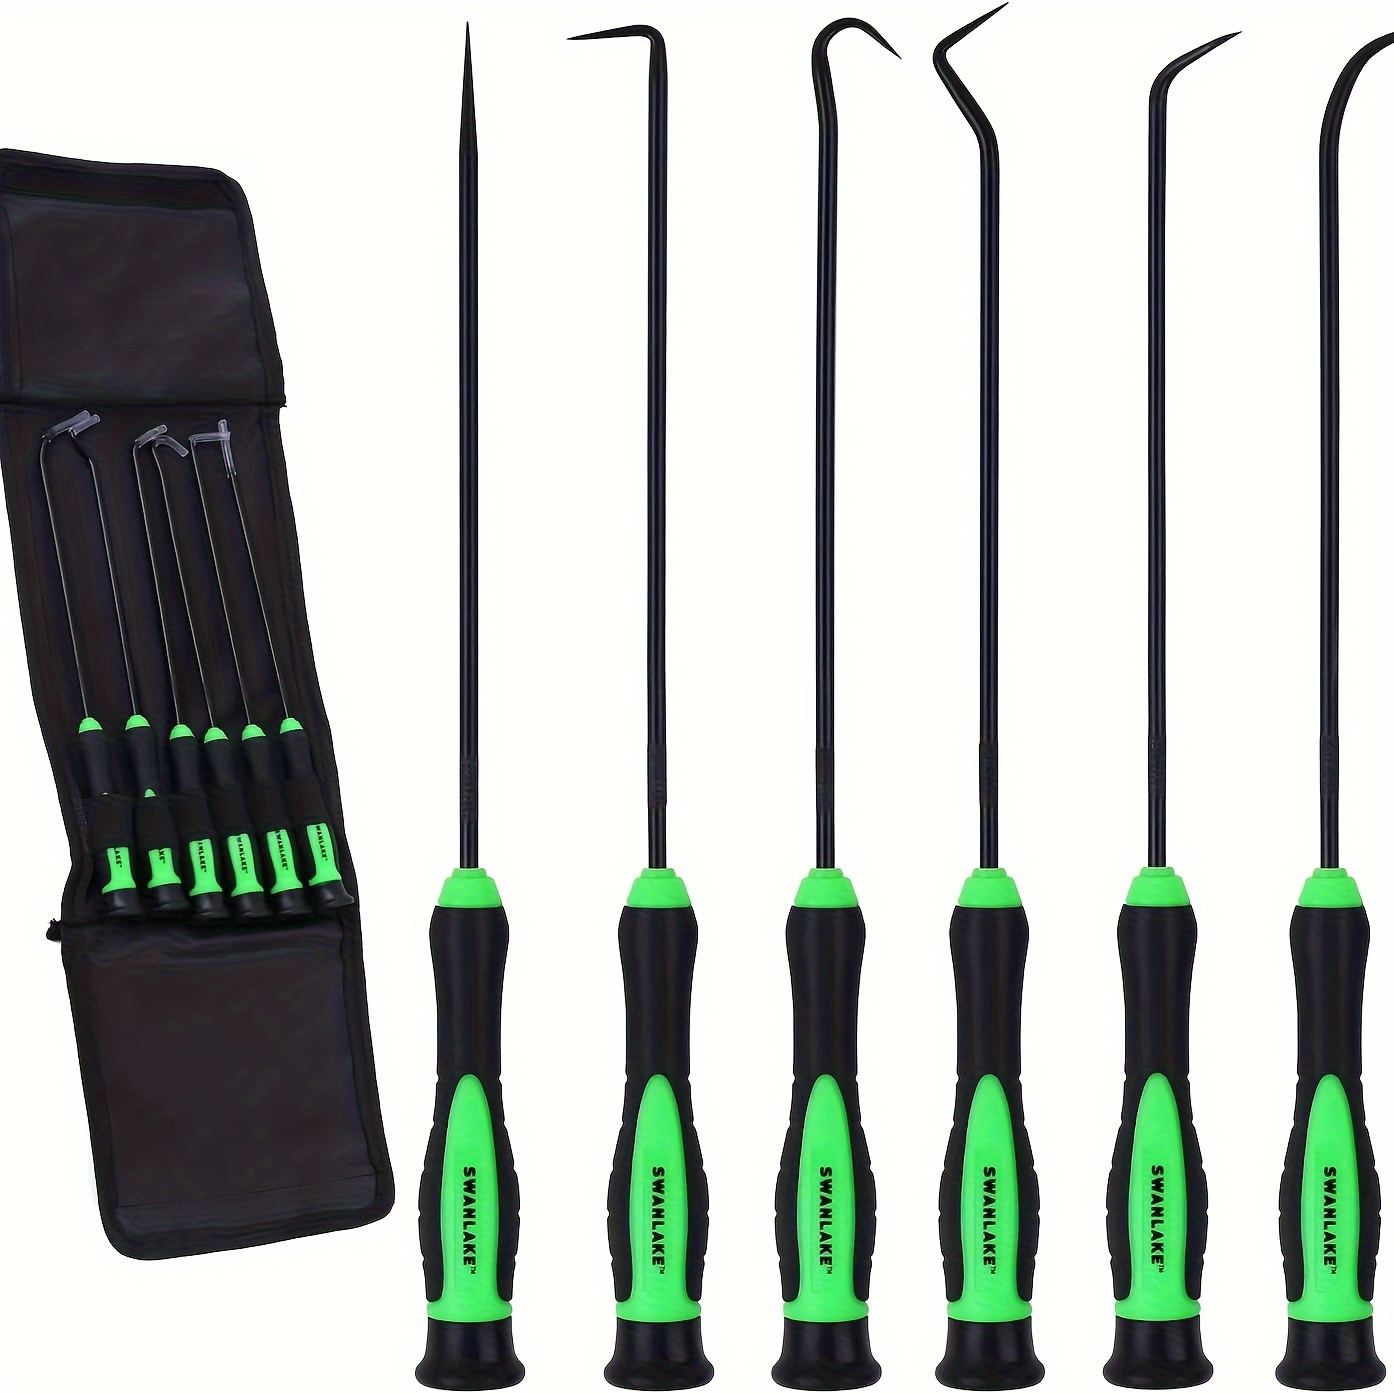 

6-piece Auto Oil Seal & O-ring Gasket Pick Set With Mini Hook Puller - S2 Steel, Grass Green/black